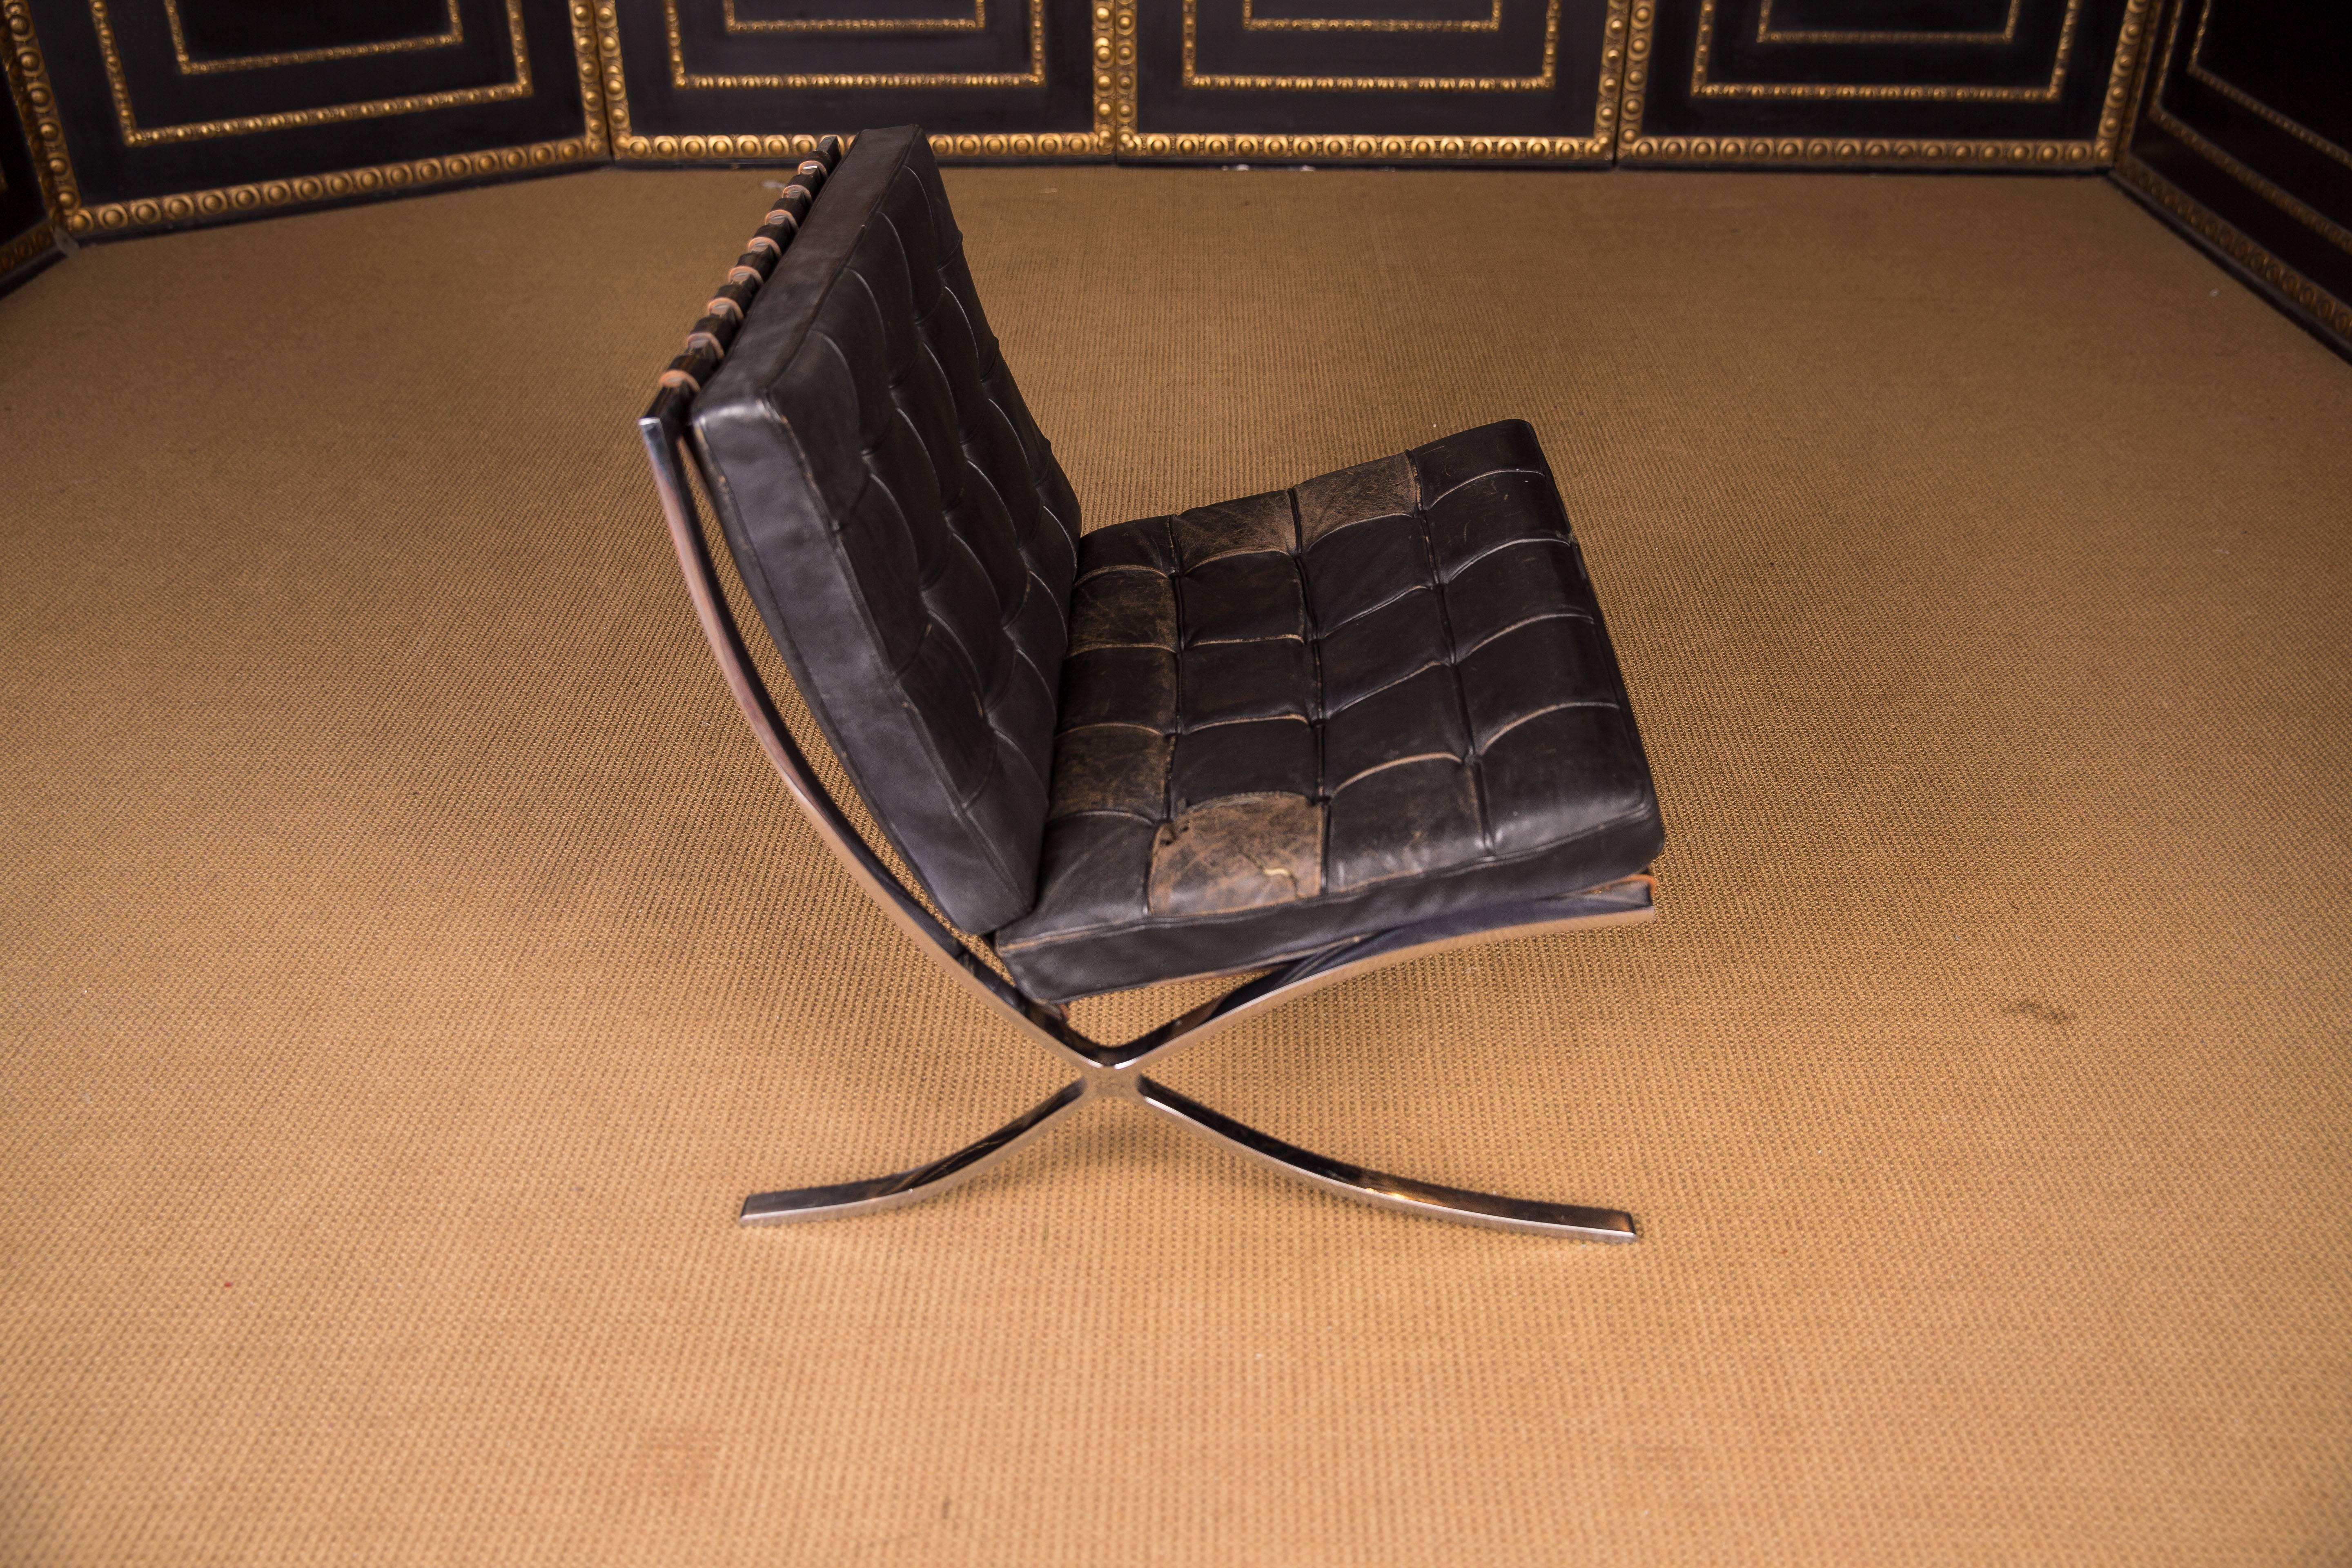 The armchair is from the 1960s-1970s. The leather is not in a good state.

Barcelona chair 